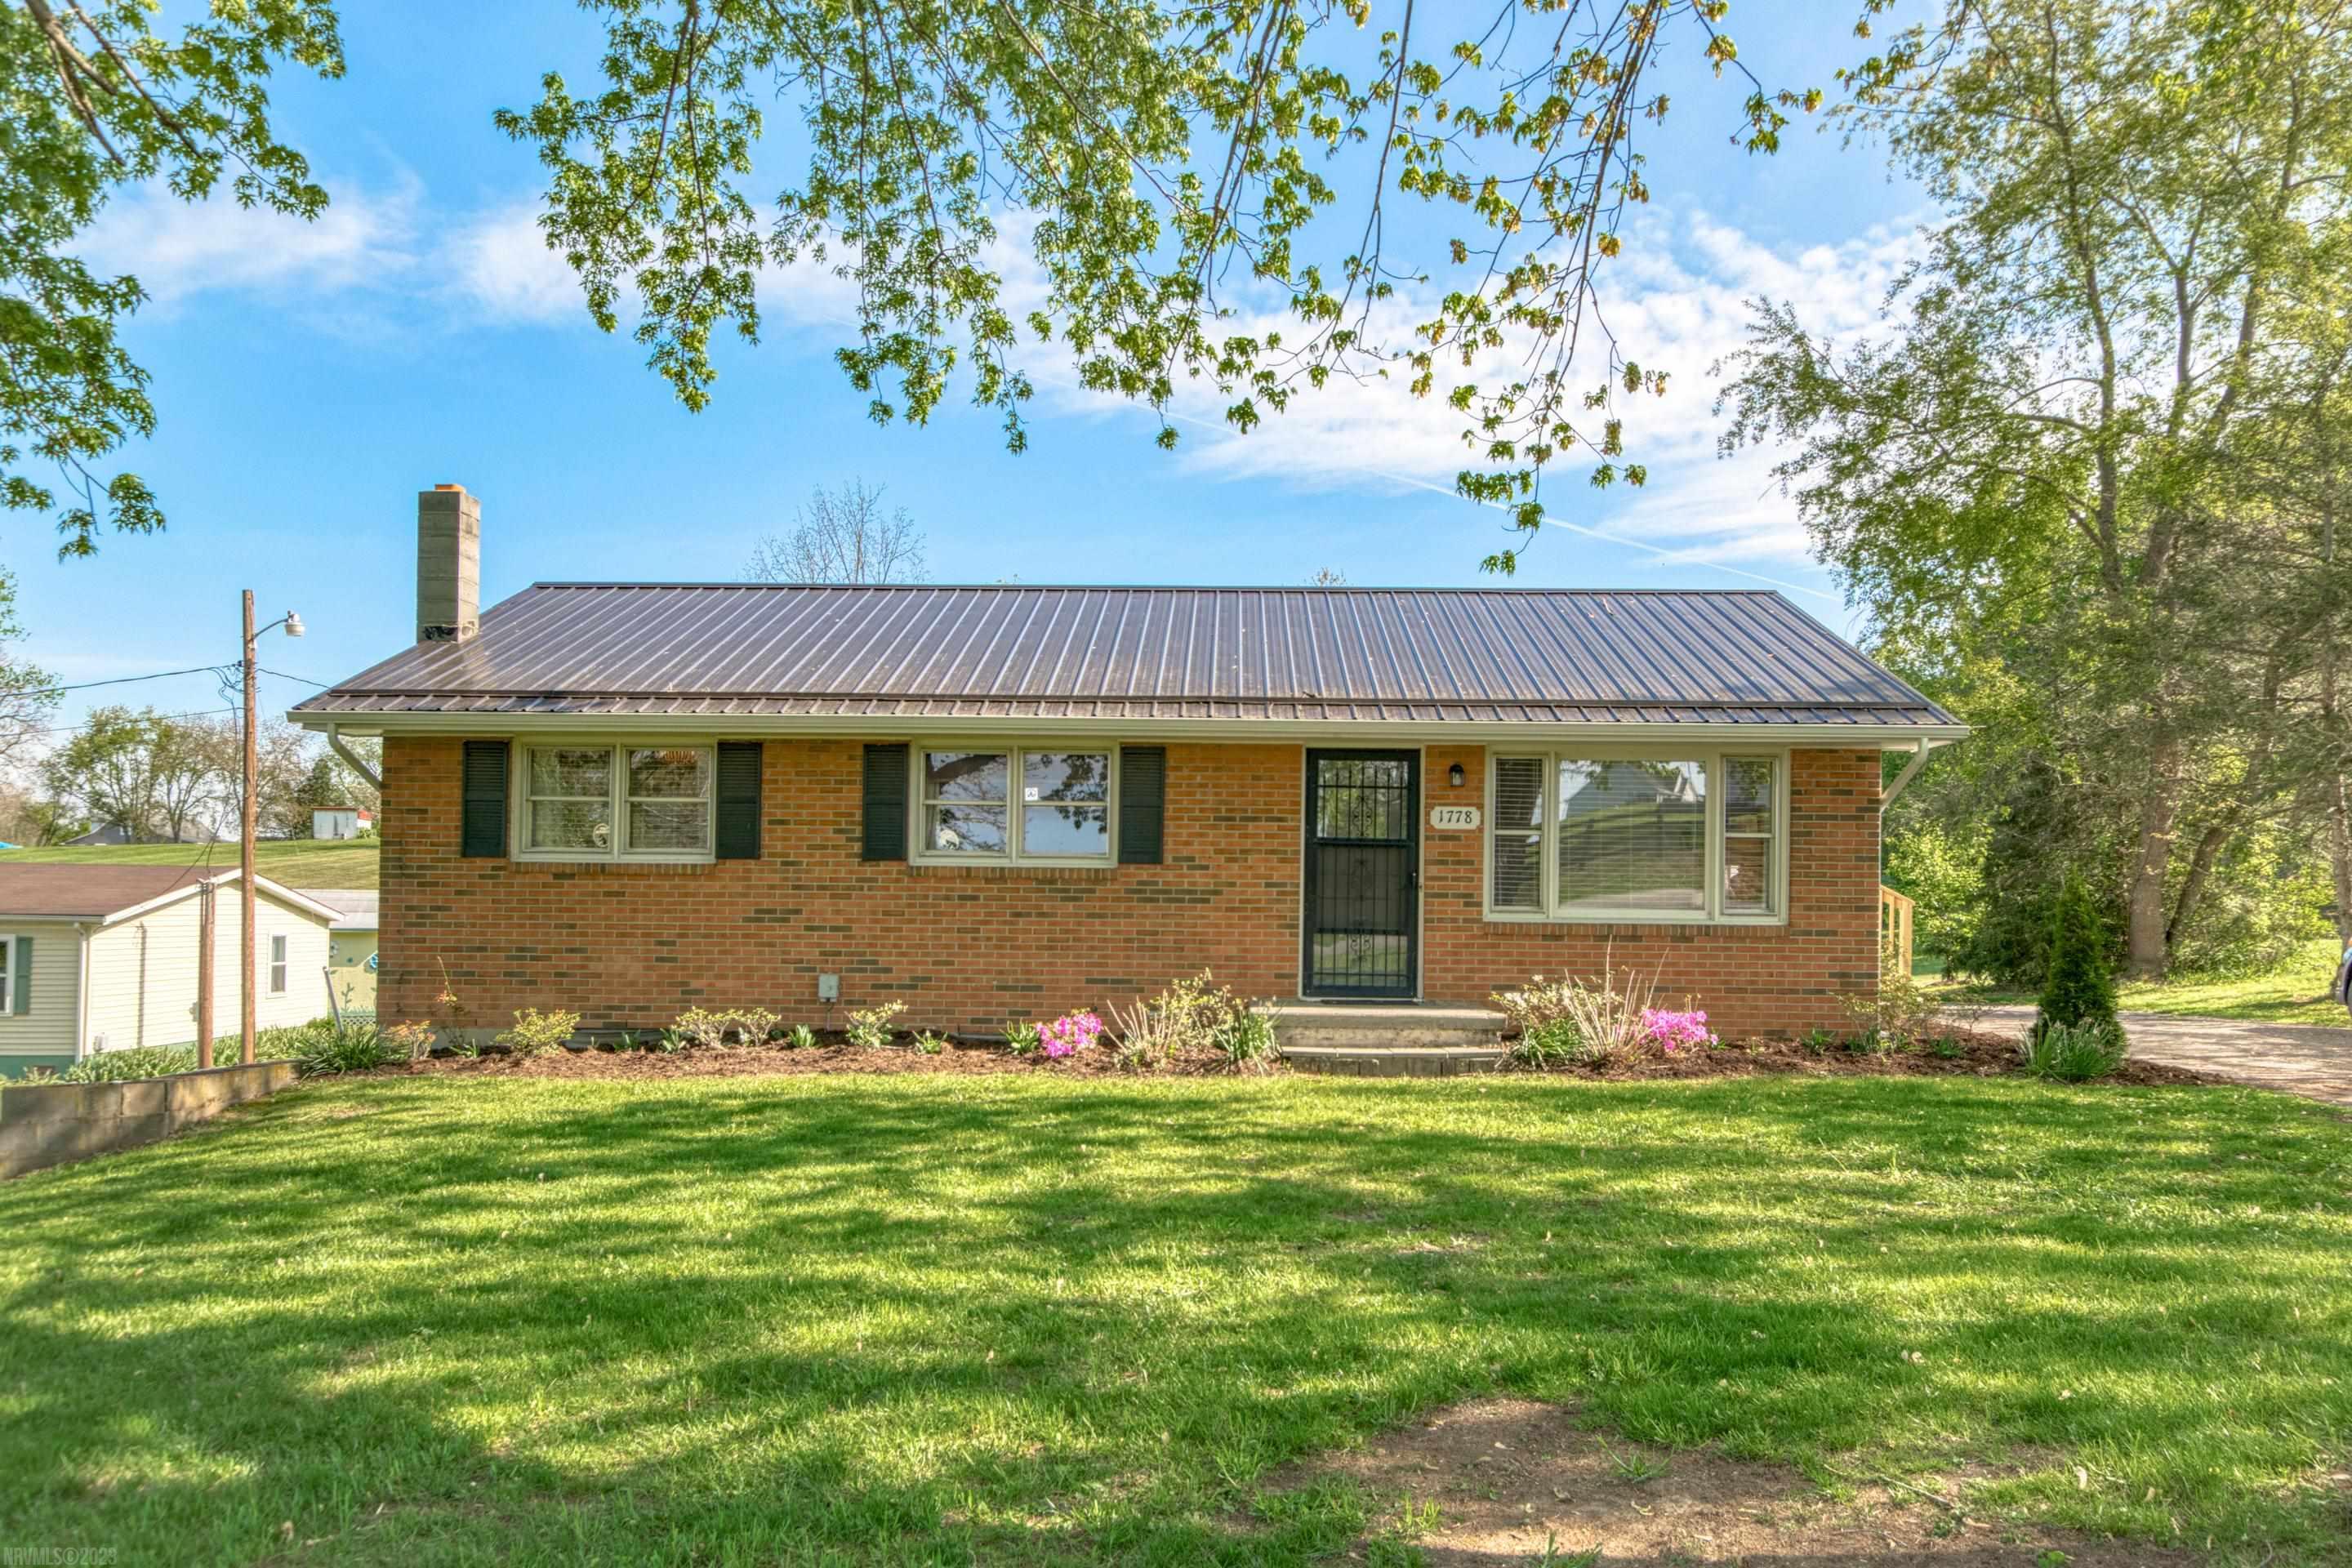 This is the one you've been waiting for! Located on almost an acre lot, this beautifully updated brick ranch is within walking distance to Auburn schools! A fenced in lot for the dogs, gardening space, a new metal roof, new floors and a full walk-out basement are just a few features it offers! Schedule a showing before it's gone!